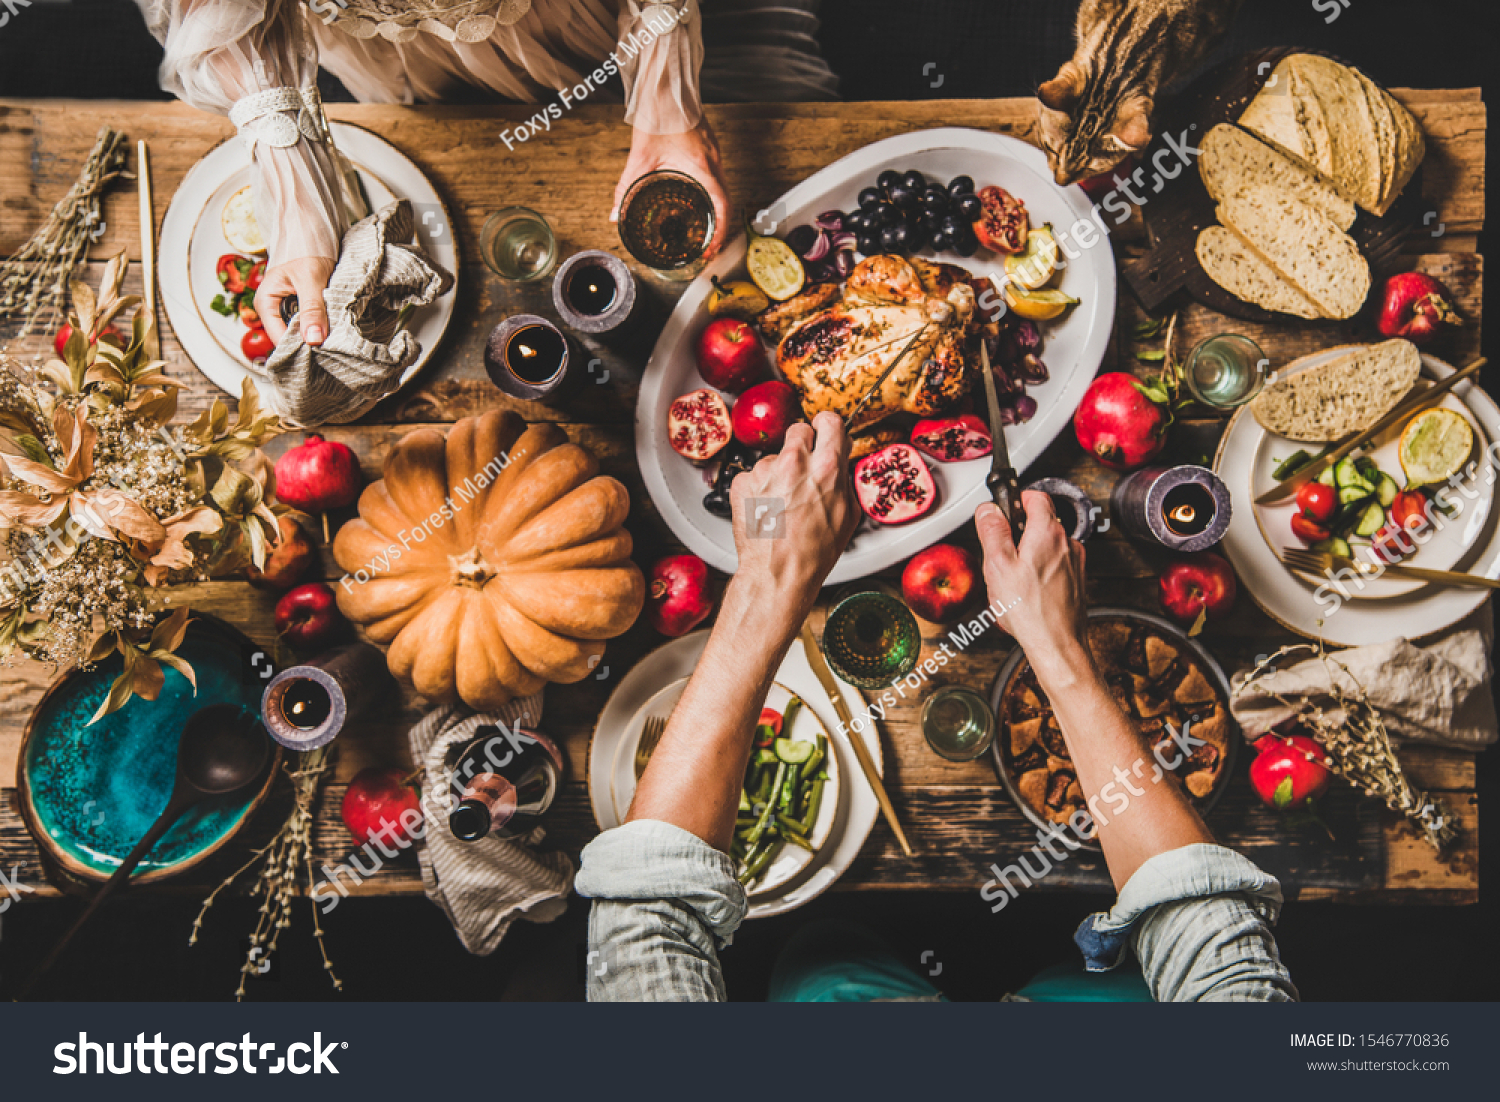 Thanksgiving party table setting. Flat-lay of whole roasted chicken, vegetables, fig pie, fruit, pumpkin, candles, tableware, eating people and tiger cat over rustic wooden table background, top view #1546770836